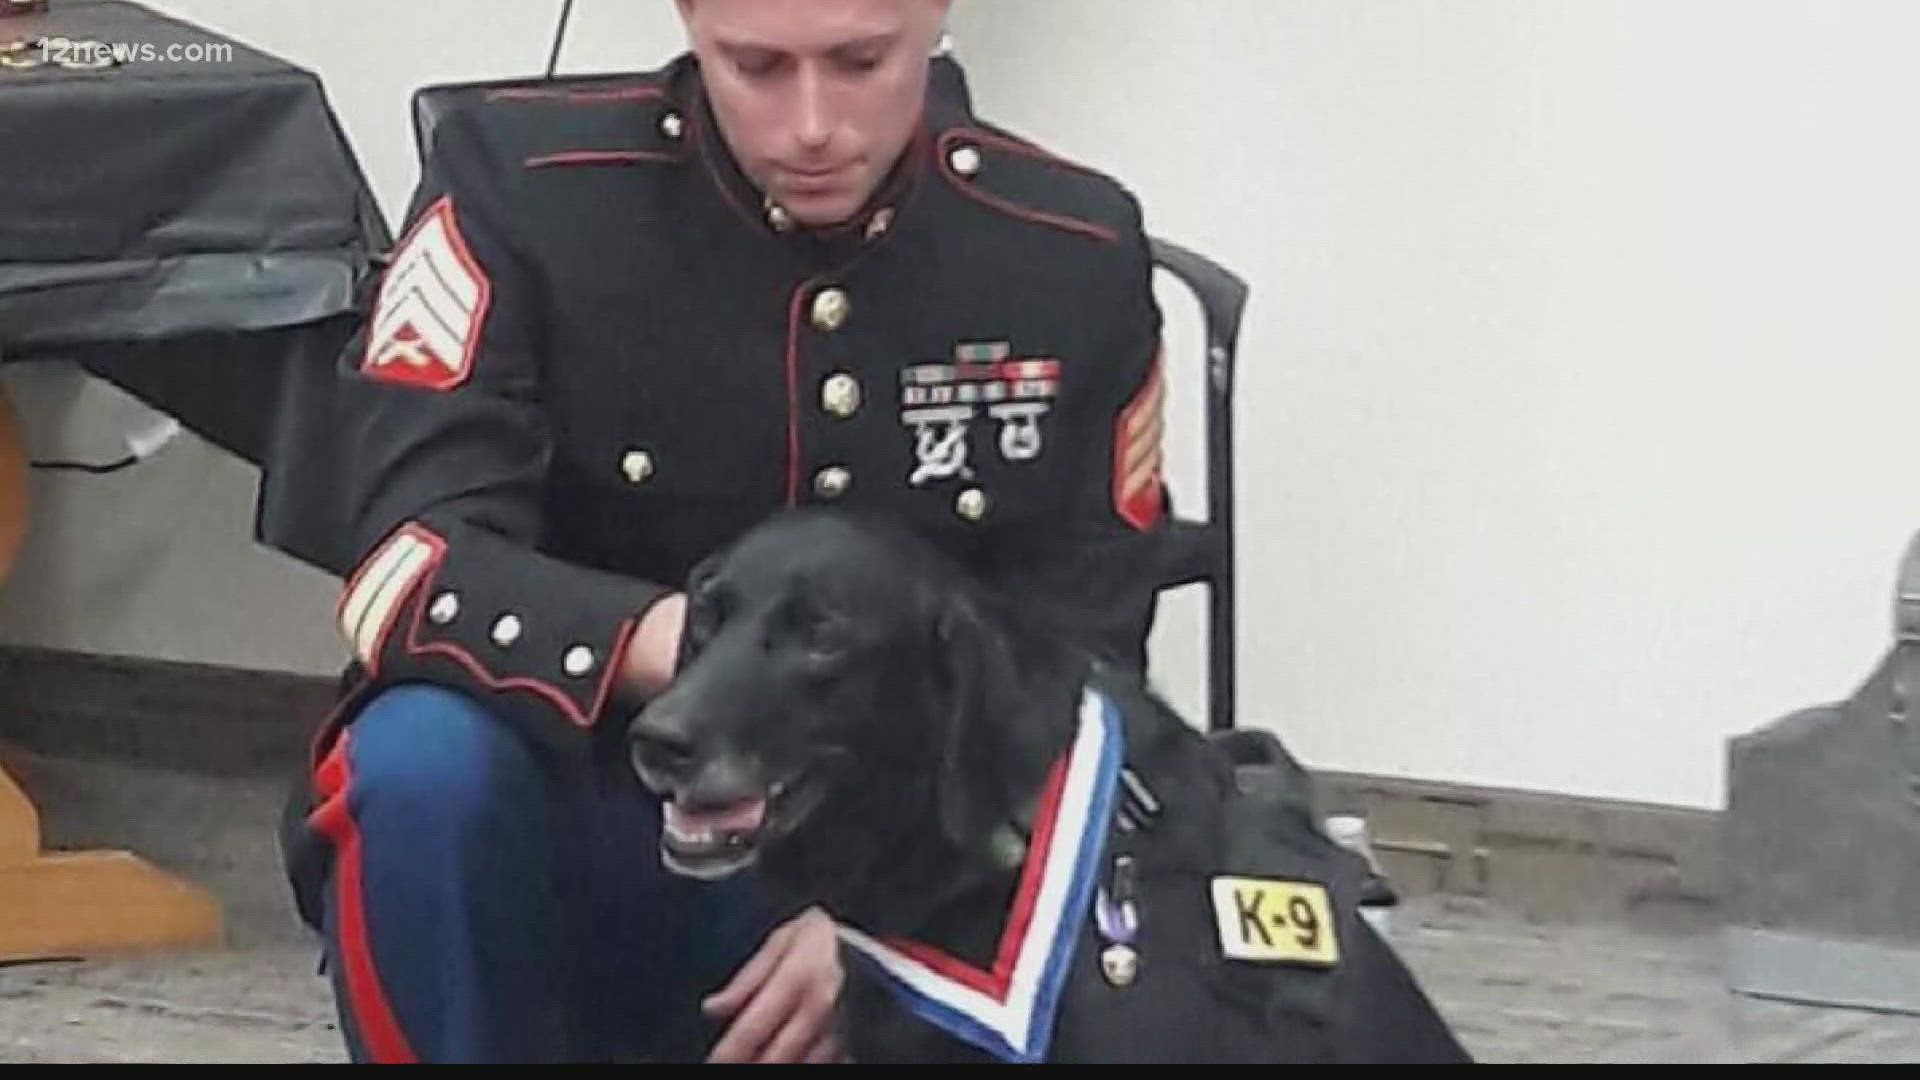 Iikan may look like a normal pup, but he is a war veteran who served with distinction. Now he spends his time on the couch and as an ambassador for military dogs.